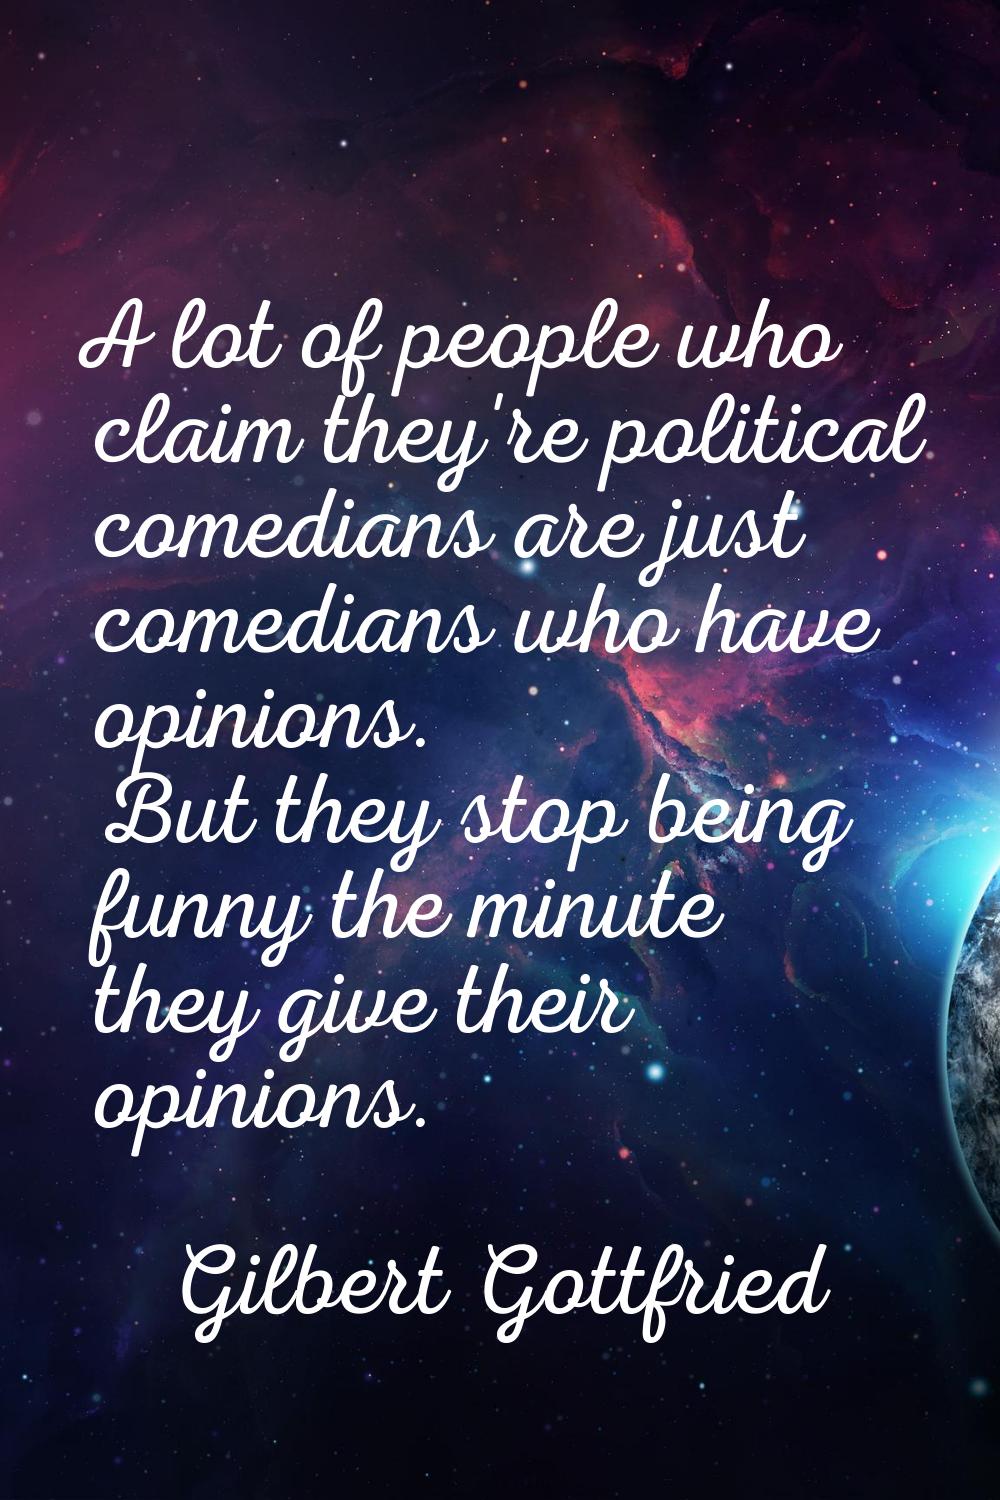 A lot of people who claim they're political comedians are just comedians who have opinions. But the